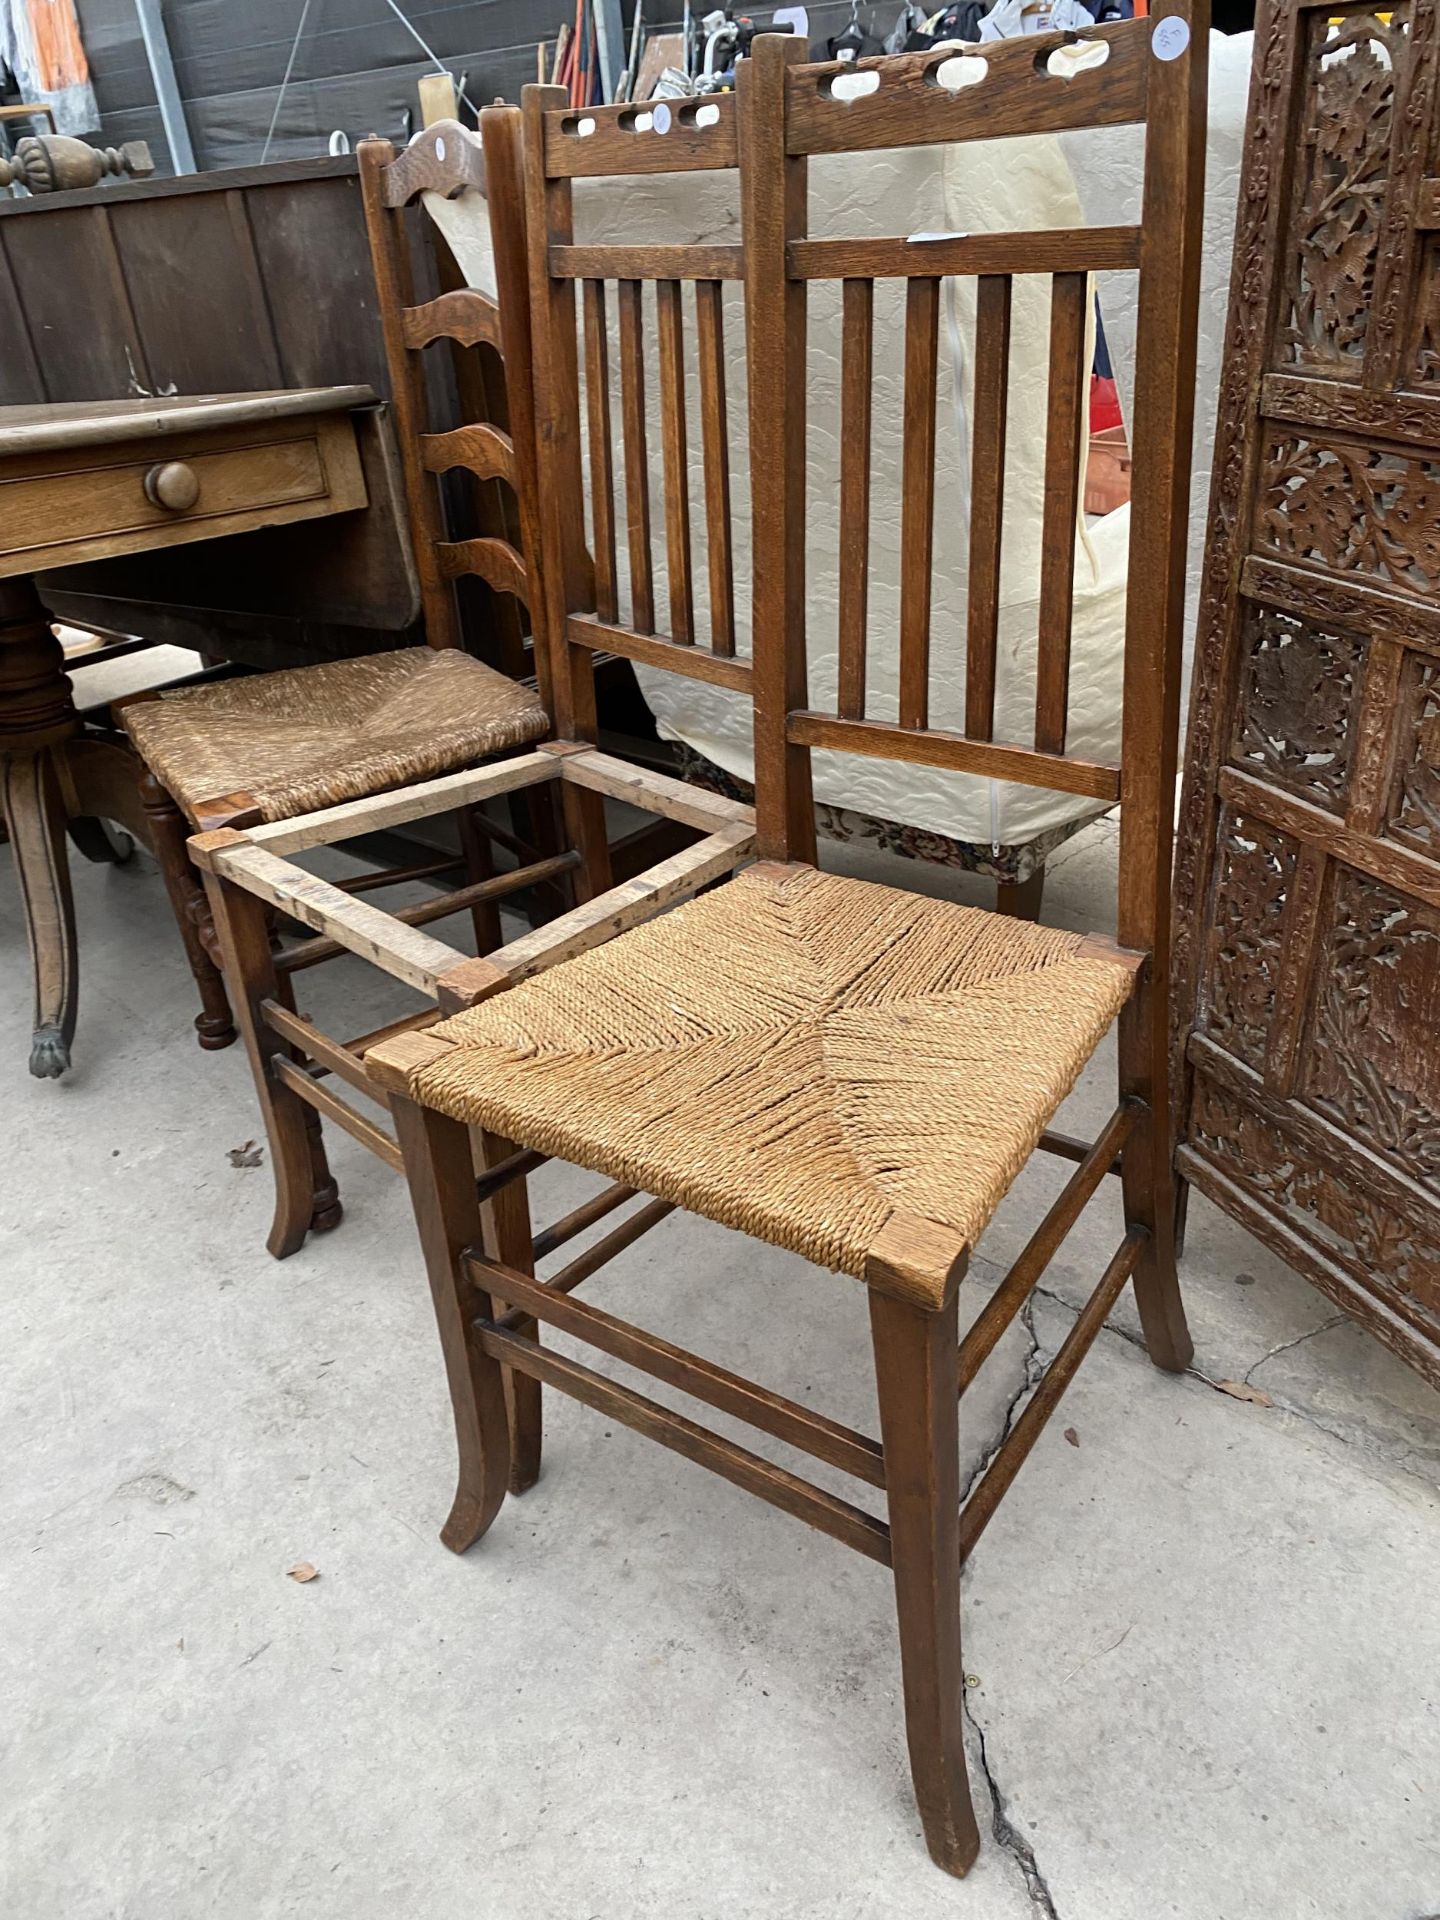 A PAIR OF OAK ARTS & CRAFTS BEDROOM CHAIRS AND LANCASHIRE LADDERBACK CHAIR - Image 2 of 2